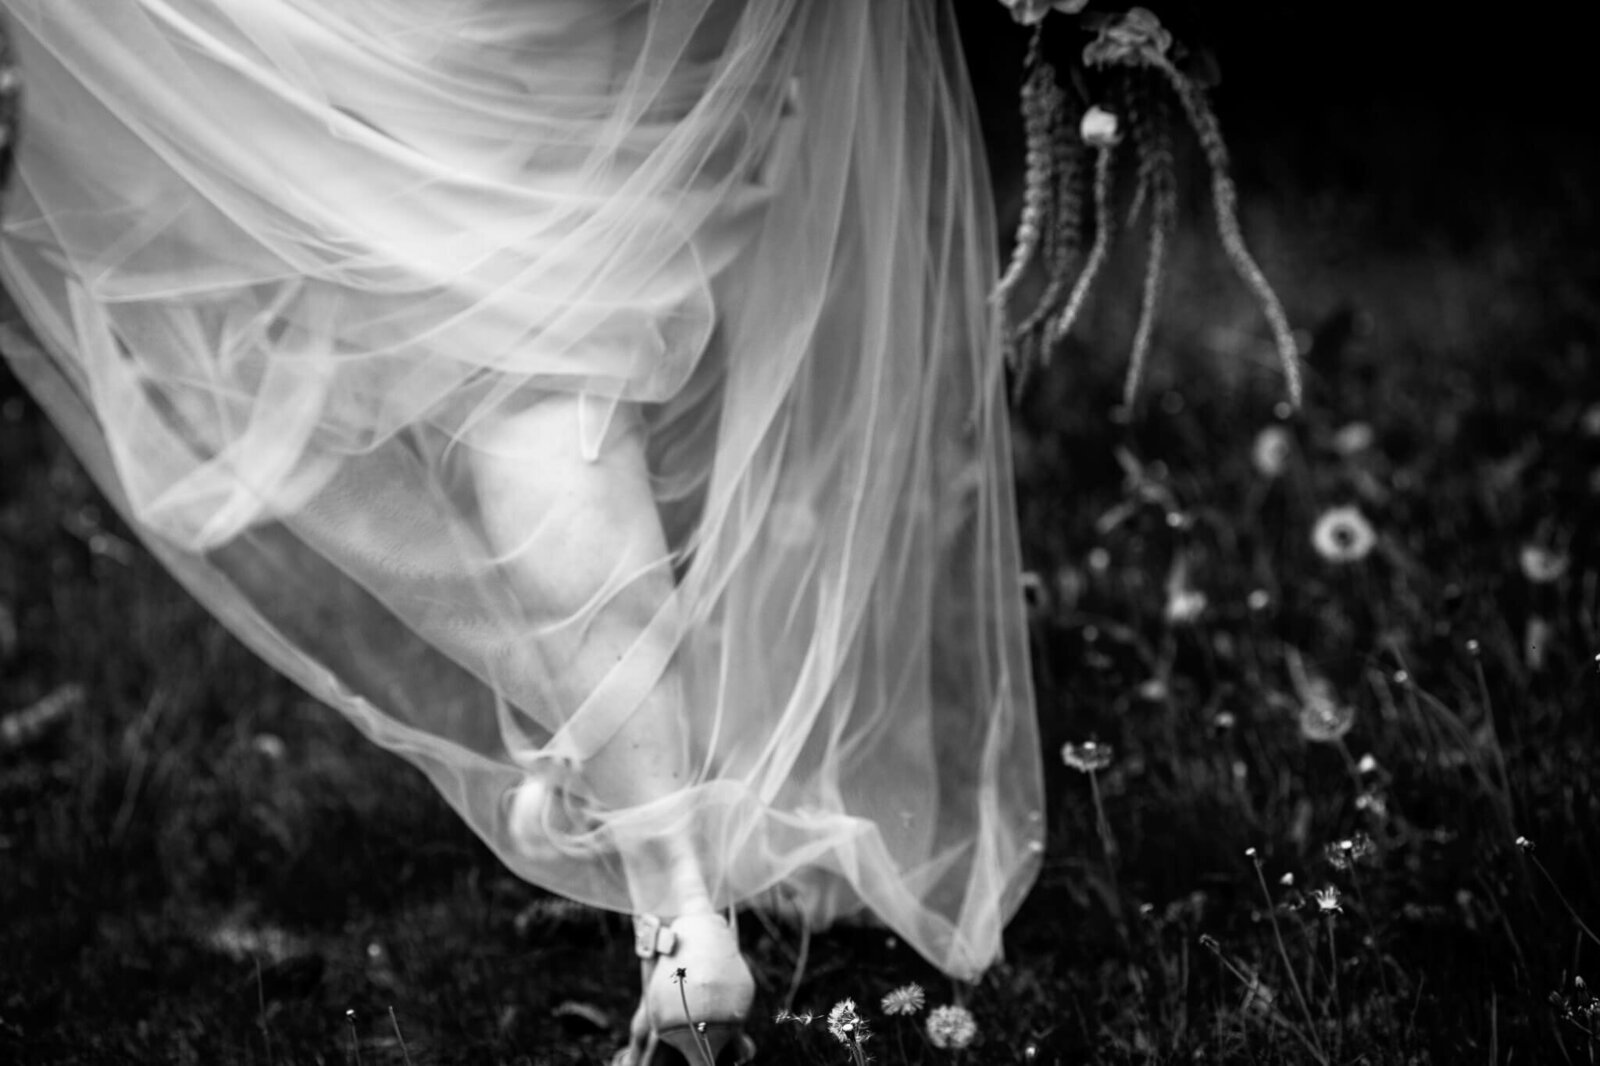 Bride's dress, shoes, and bouquet as she walks through a wildflower field..